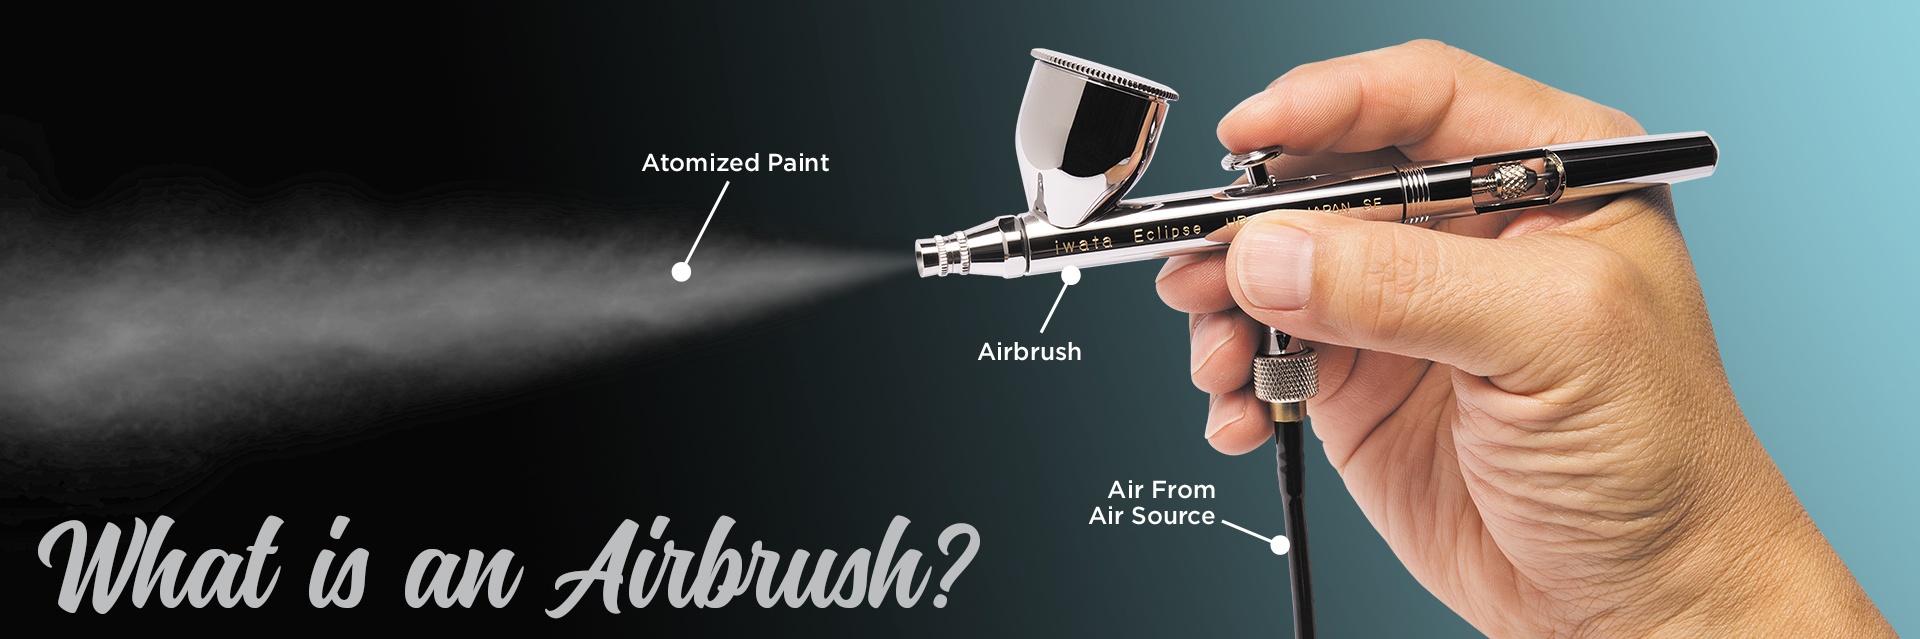 https://www.iwata-airbrush.com/mm5/graphics/00000001/GS_What%20is%20an%20Airbrush%20HDR.jpg